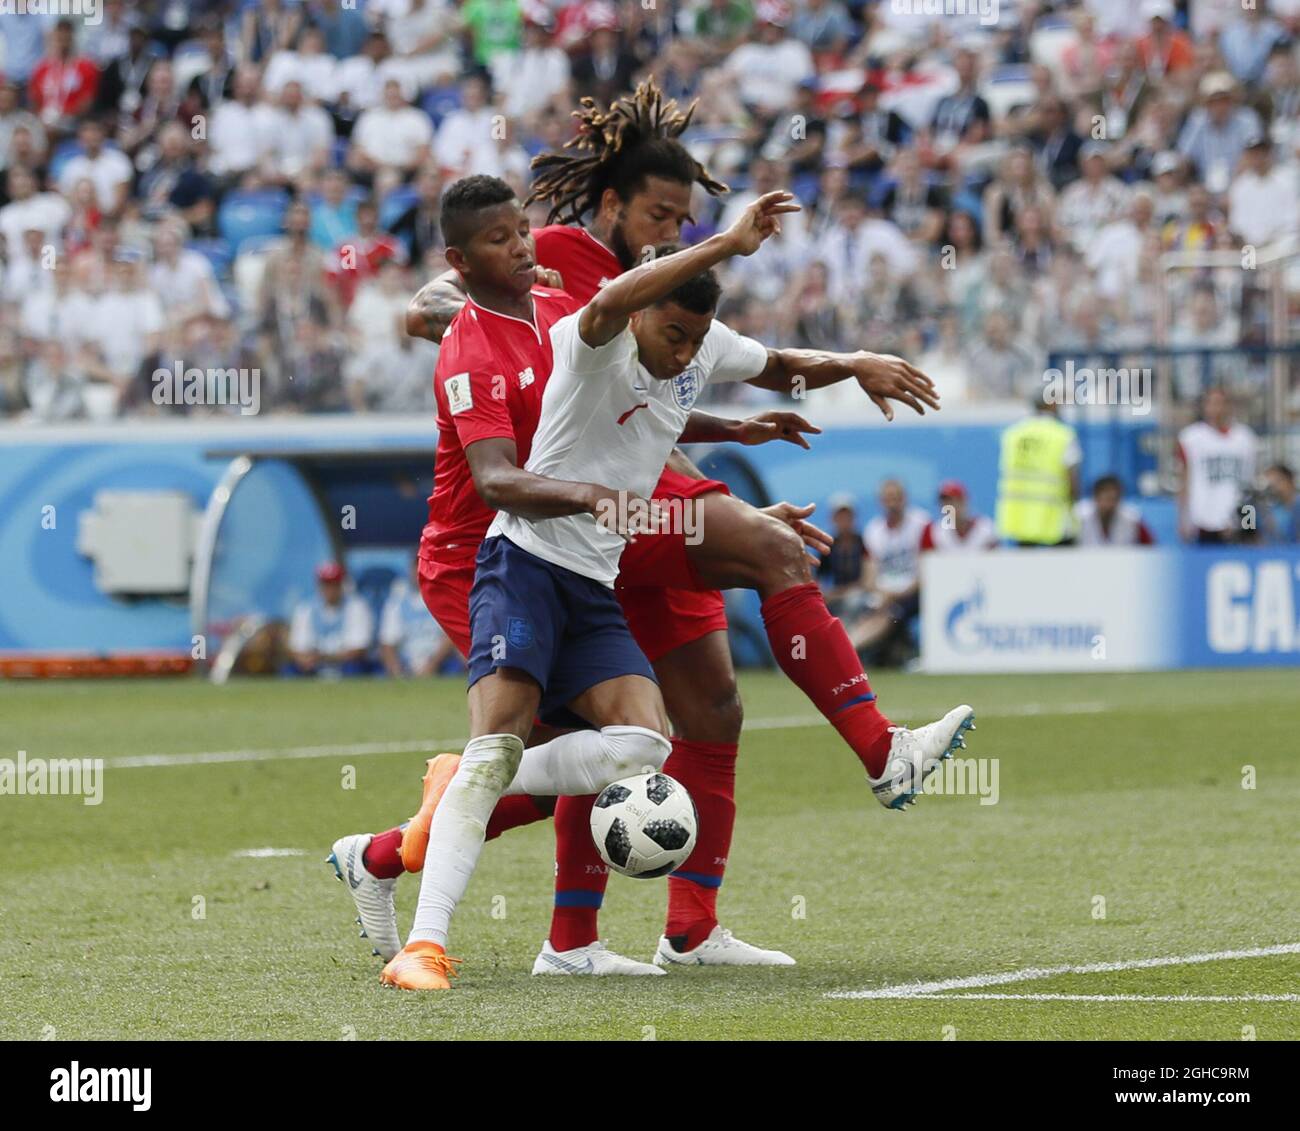 Jesse Lingard of England is brought down by Fidel Escobar of Panama to earn a penalty during the FIFA World Cup 2018 Group G match at the Nizhny Novgorod Stadium, Nizhny Novgorod. Picture date 24th June 2018. Picture credit should read: David Klein/Sportimage via PA Images Stock Photo